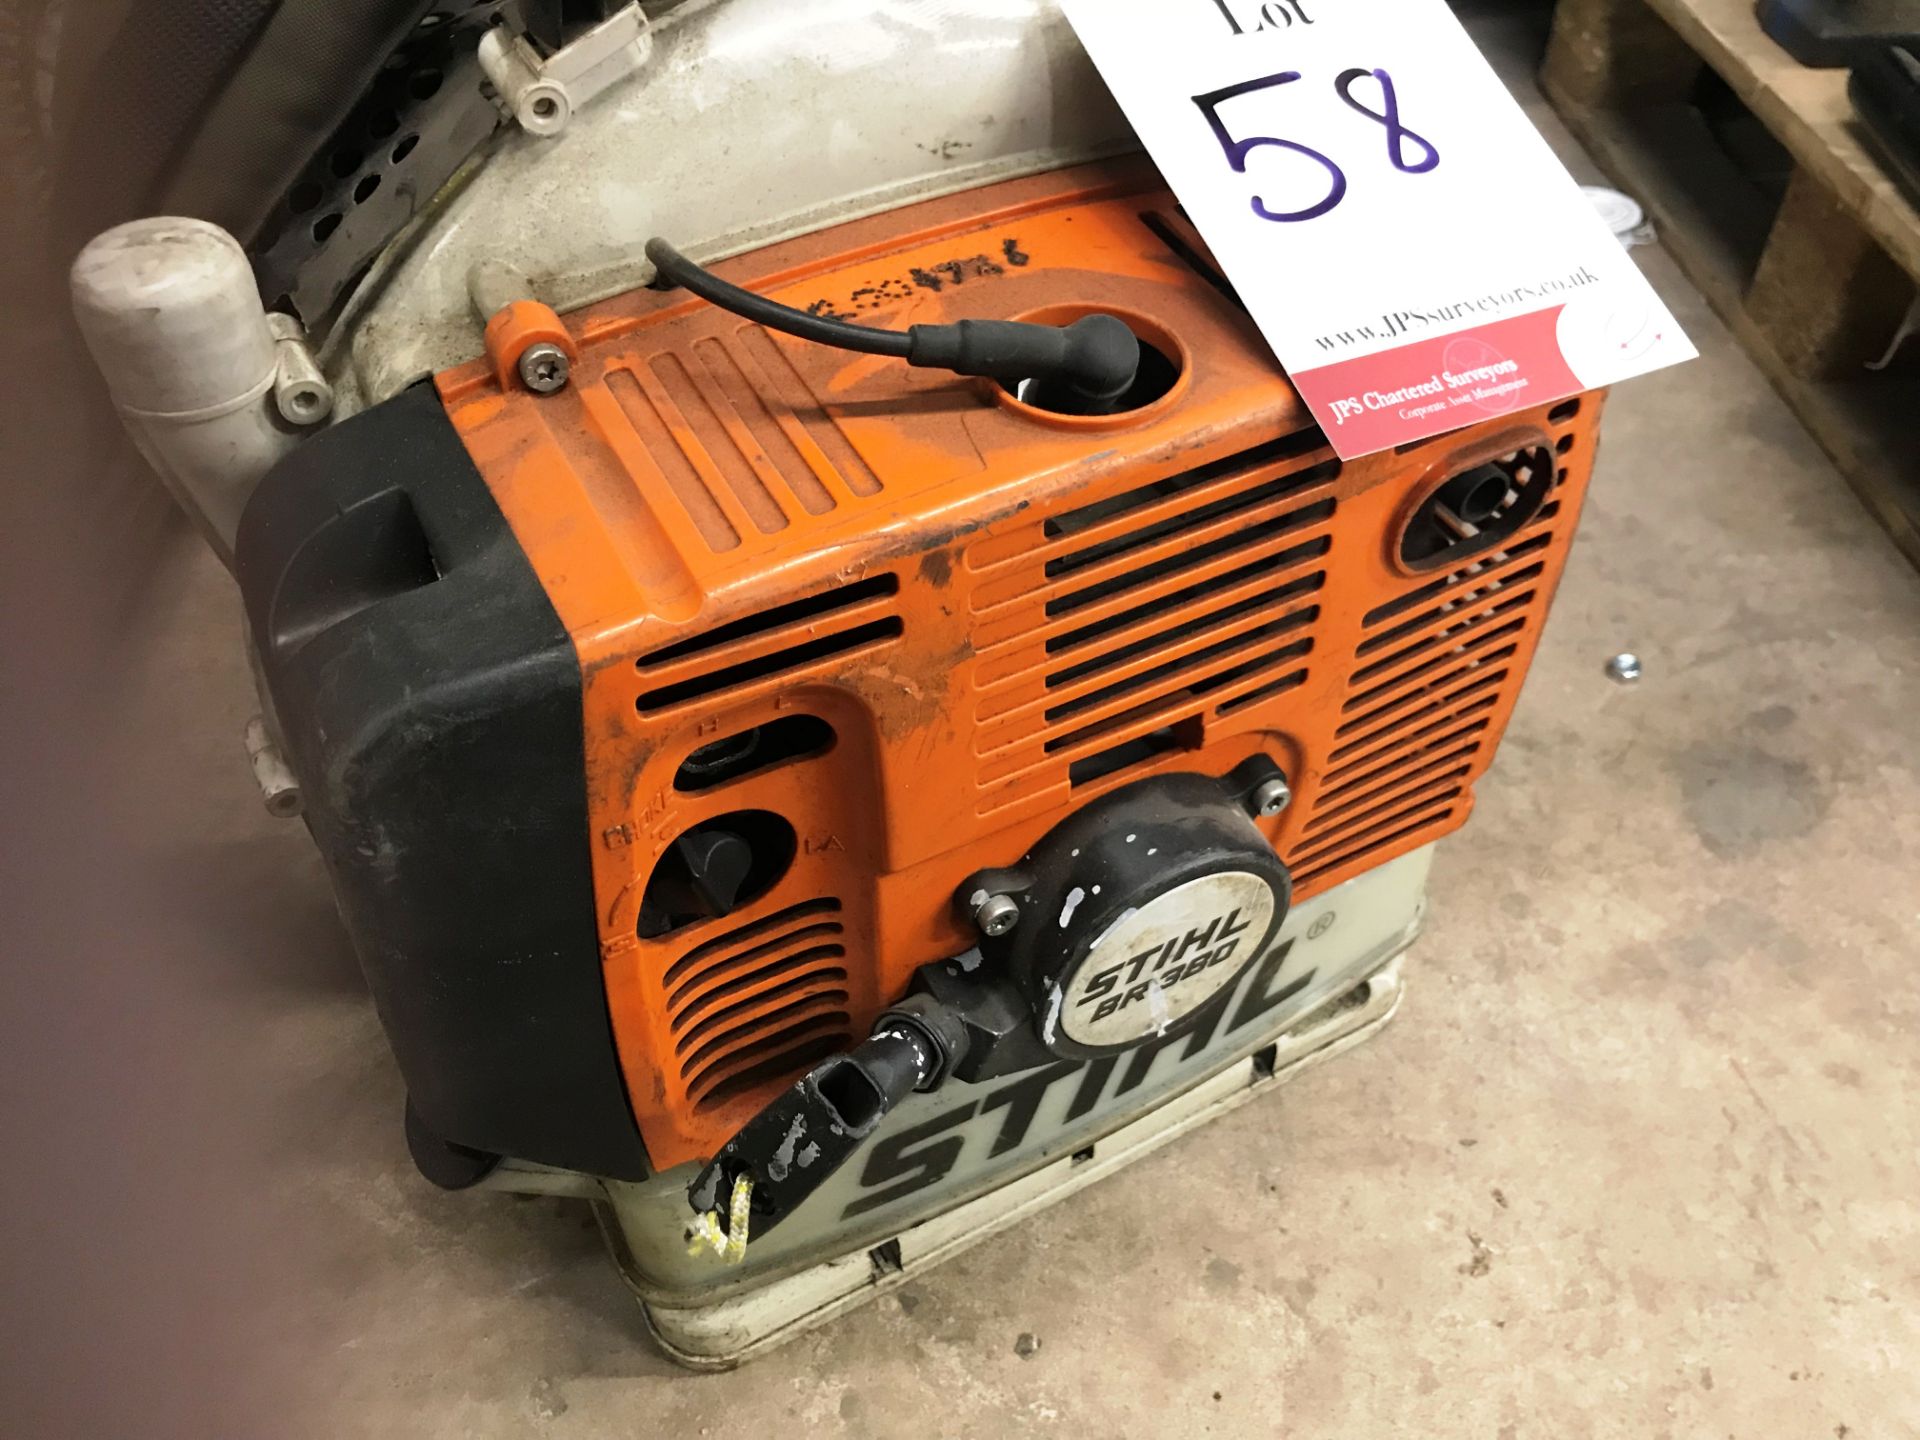 Stihl BR 380 Back Pack Blower - Missing Parts - Image 2 of 2